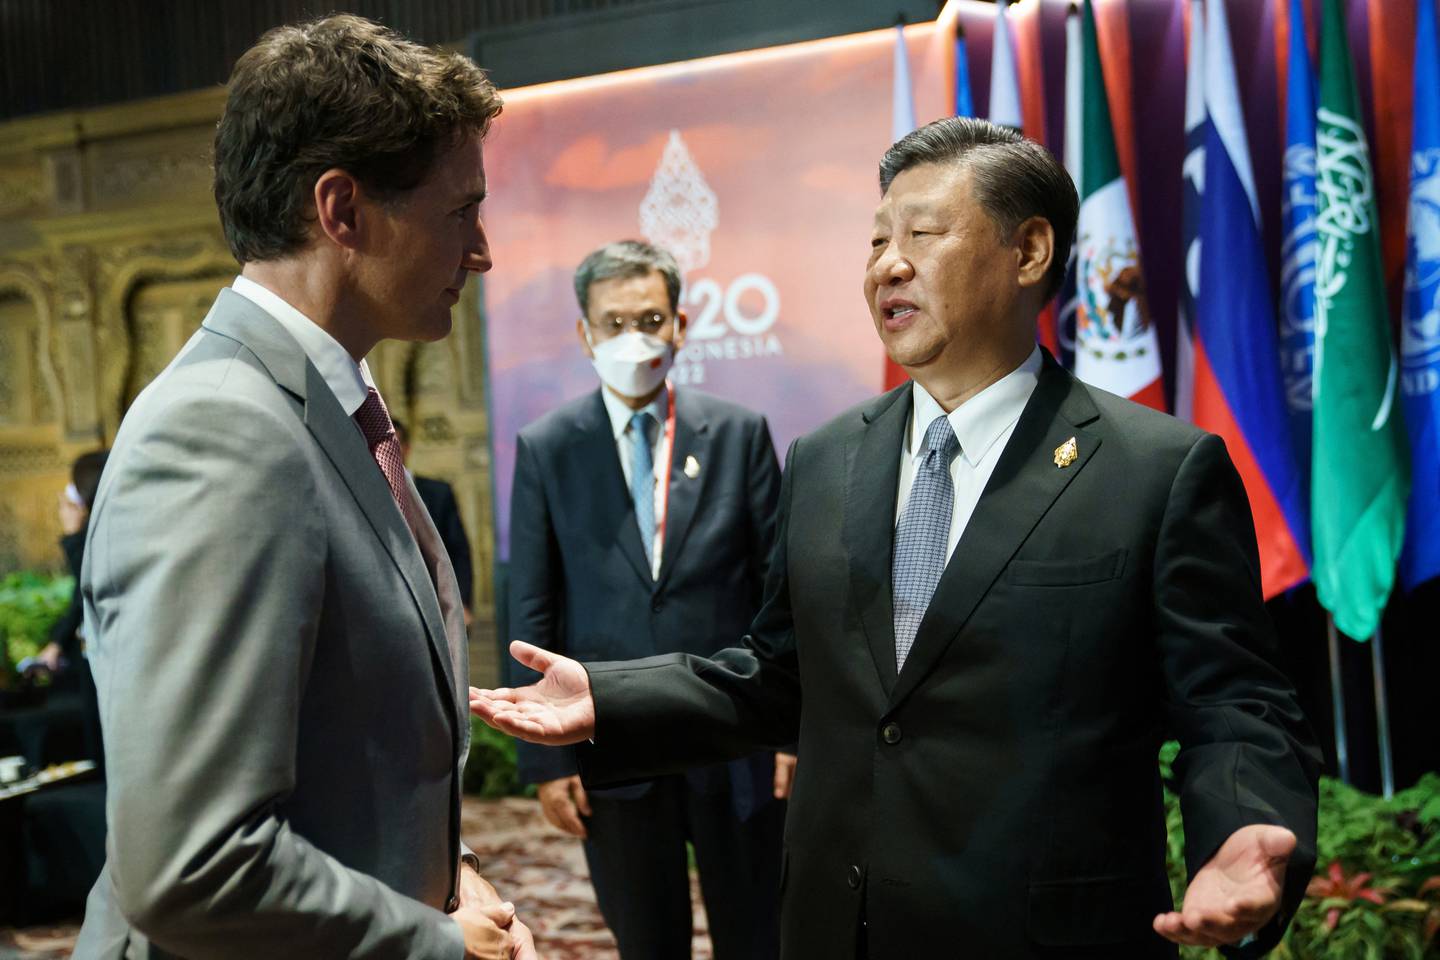 Chinese President President Xi Jinping speaks with Canadian Prime Minister Justin Trudeau at the G20 summit in Bali, Indonesia. Reuters